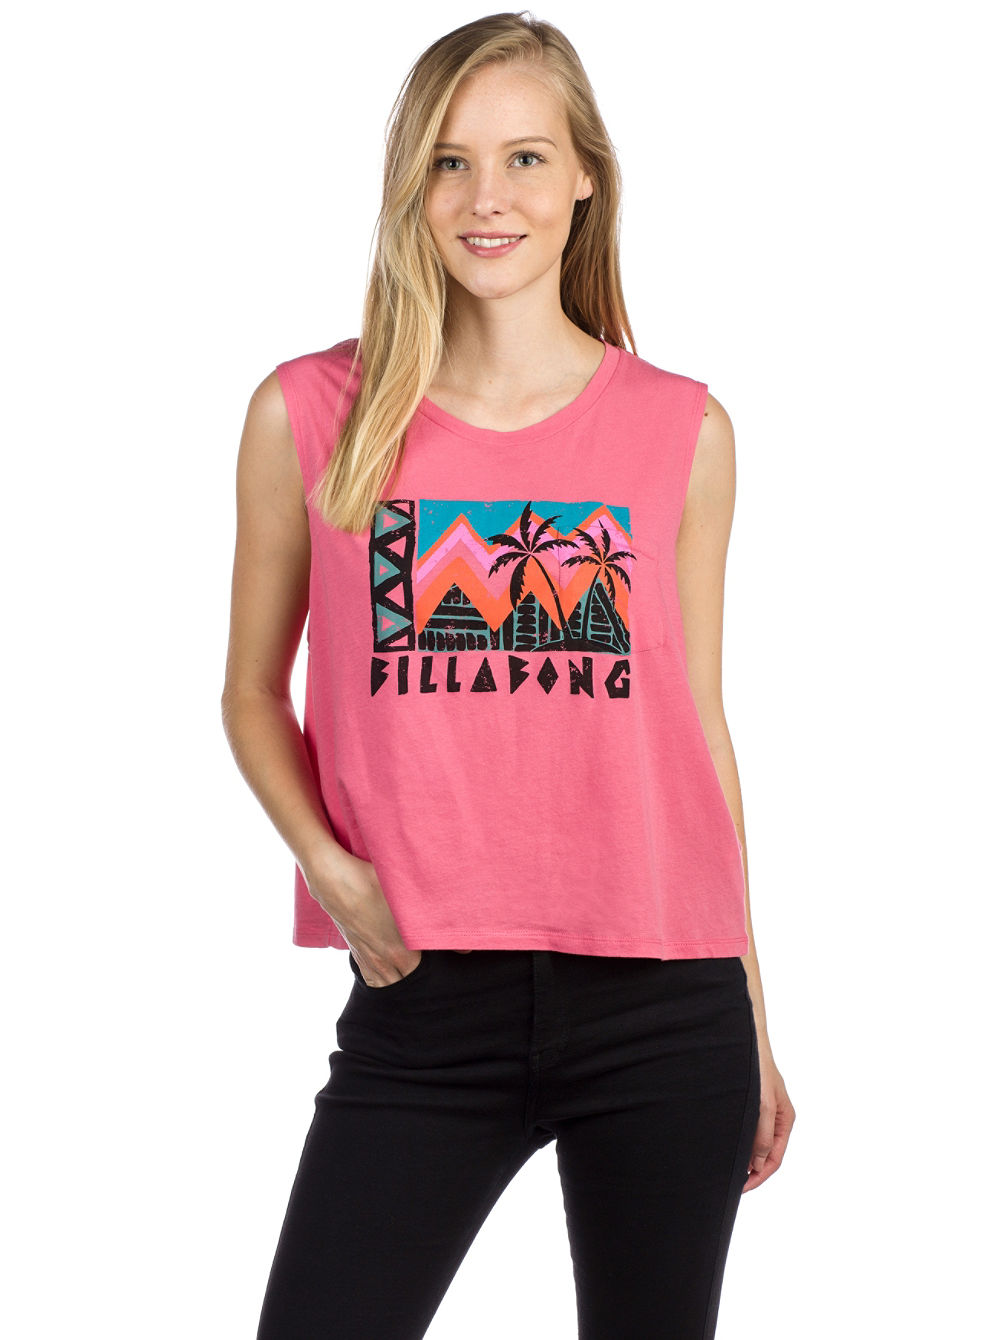 Find Your Tribe Tank Top